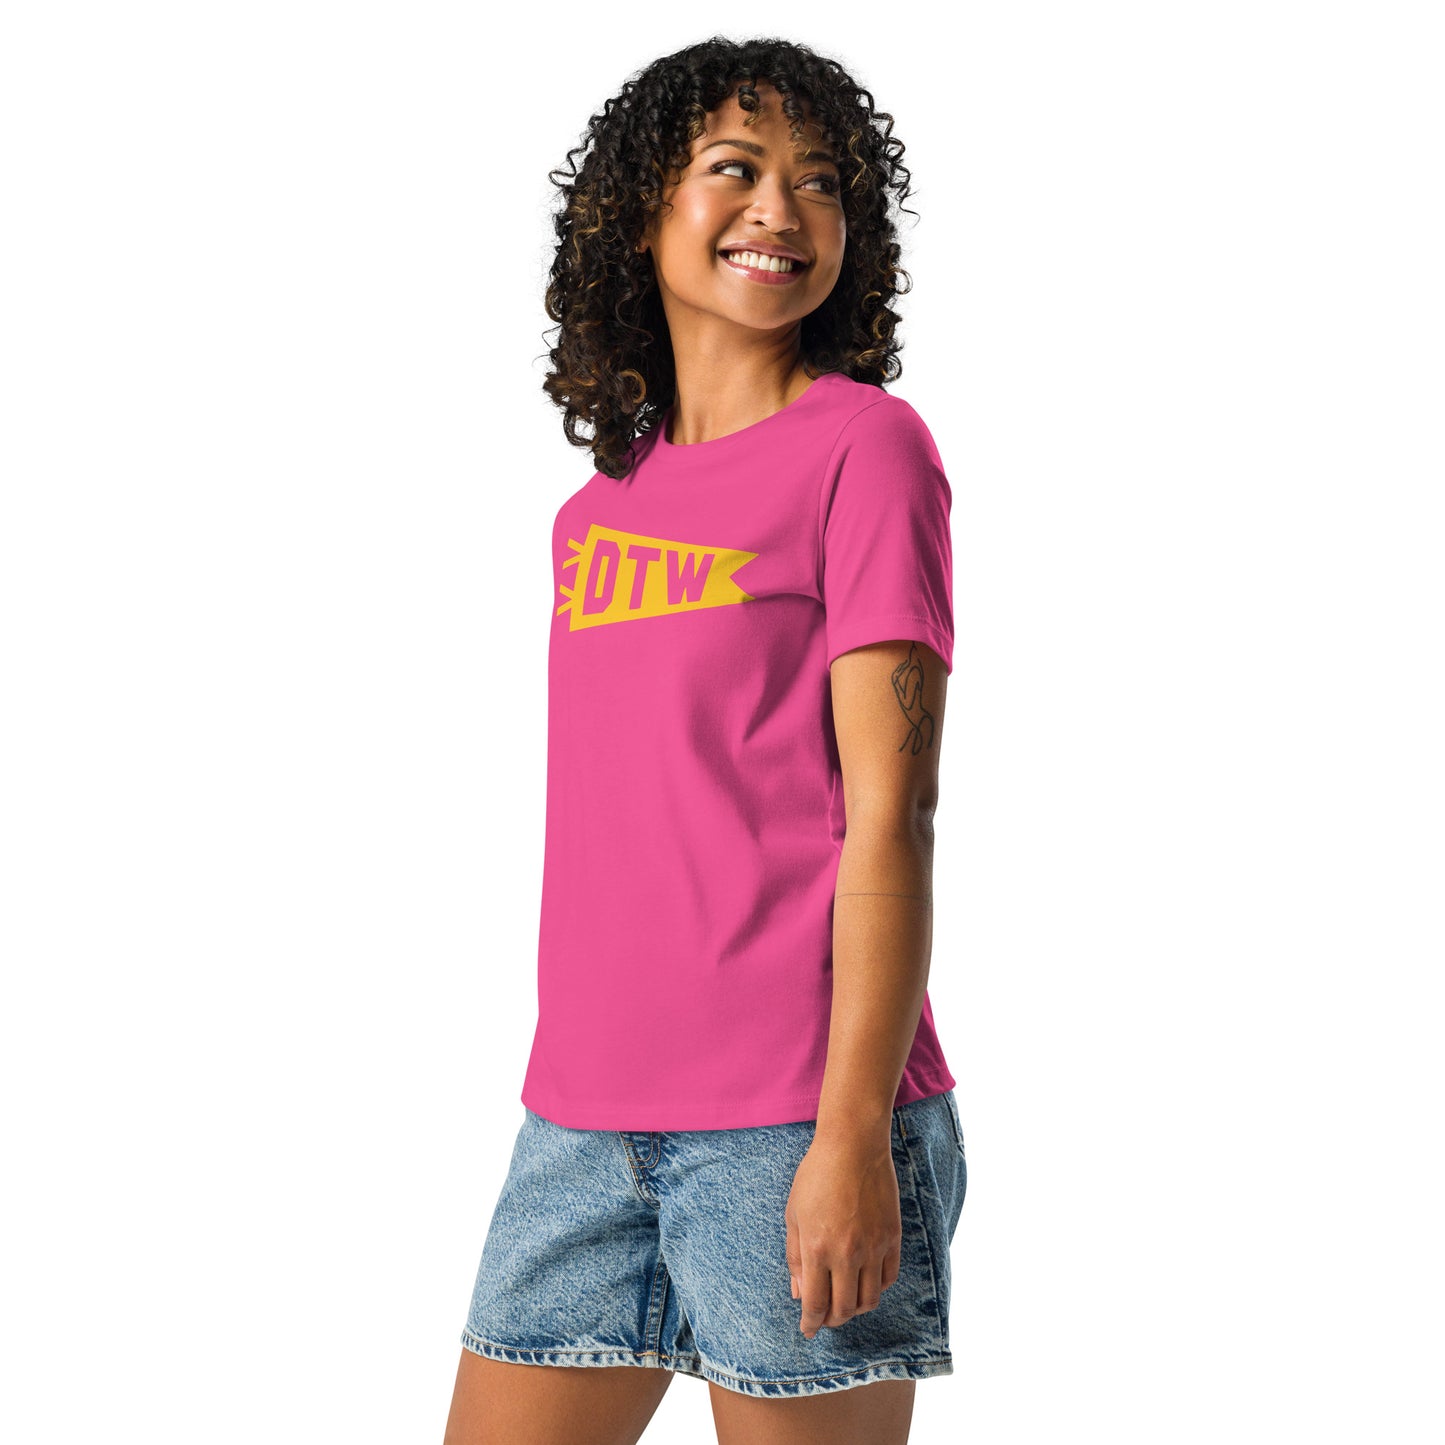 Airport Code Women's Tee - Yellow Graphic • DTW Detroit • YHM Designs - Image 06